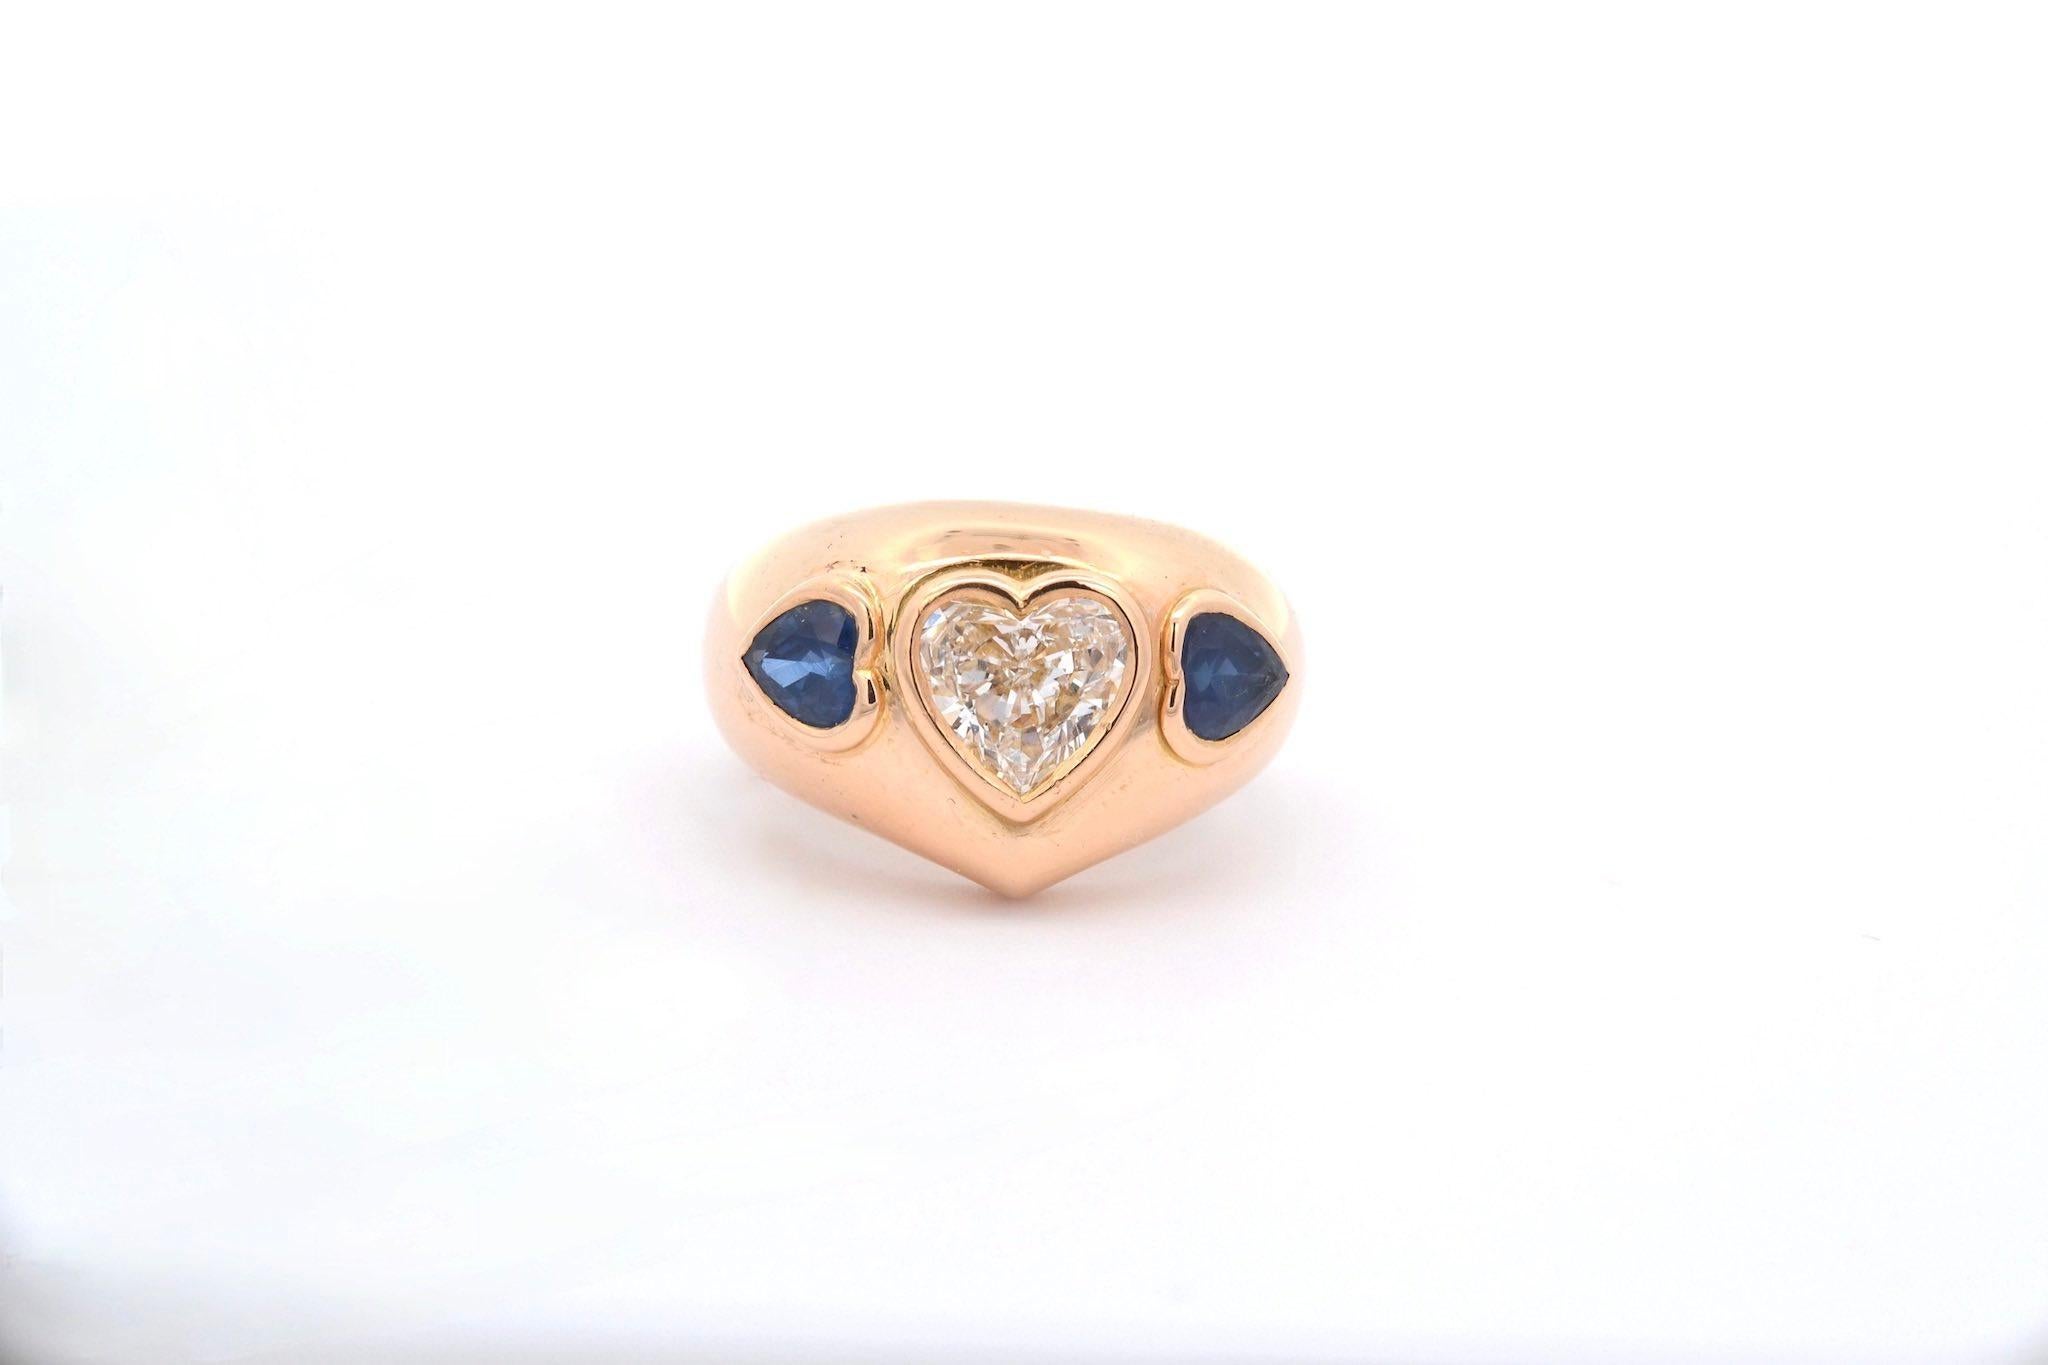 Stones: 1 diamond of 1.20 cts VS / H and 2 heart sapphires, Weight: 1.20 cts
Material: 18k yellow gold
Weight: 12.7g
Period: Recent
Size: 52 (free sizing)
Certificate
Ref. : 25050